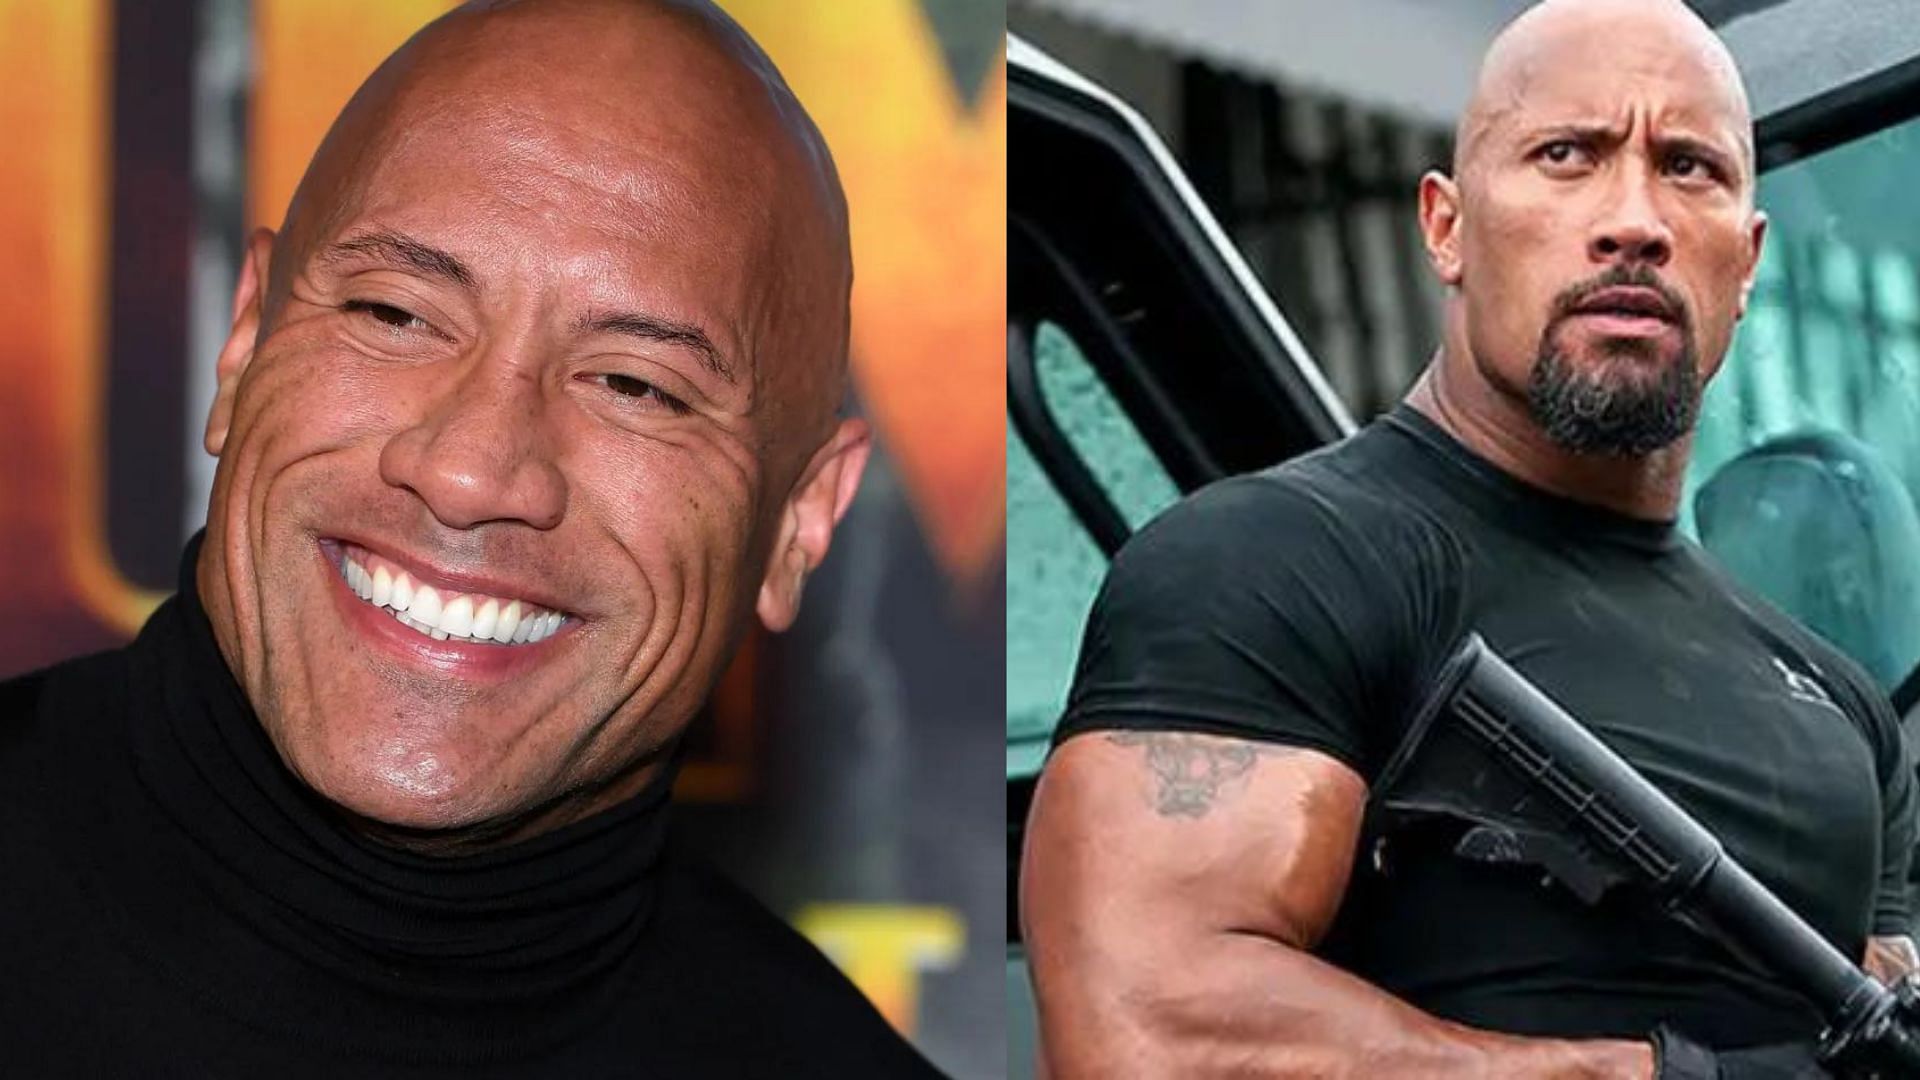 WWE star and Hollywood actor Dwayne Johnson starred in a lot of major movies